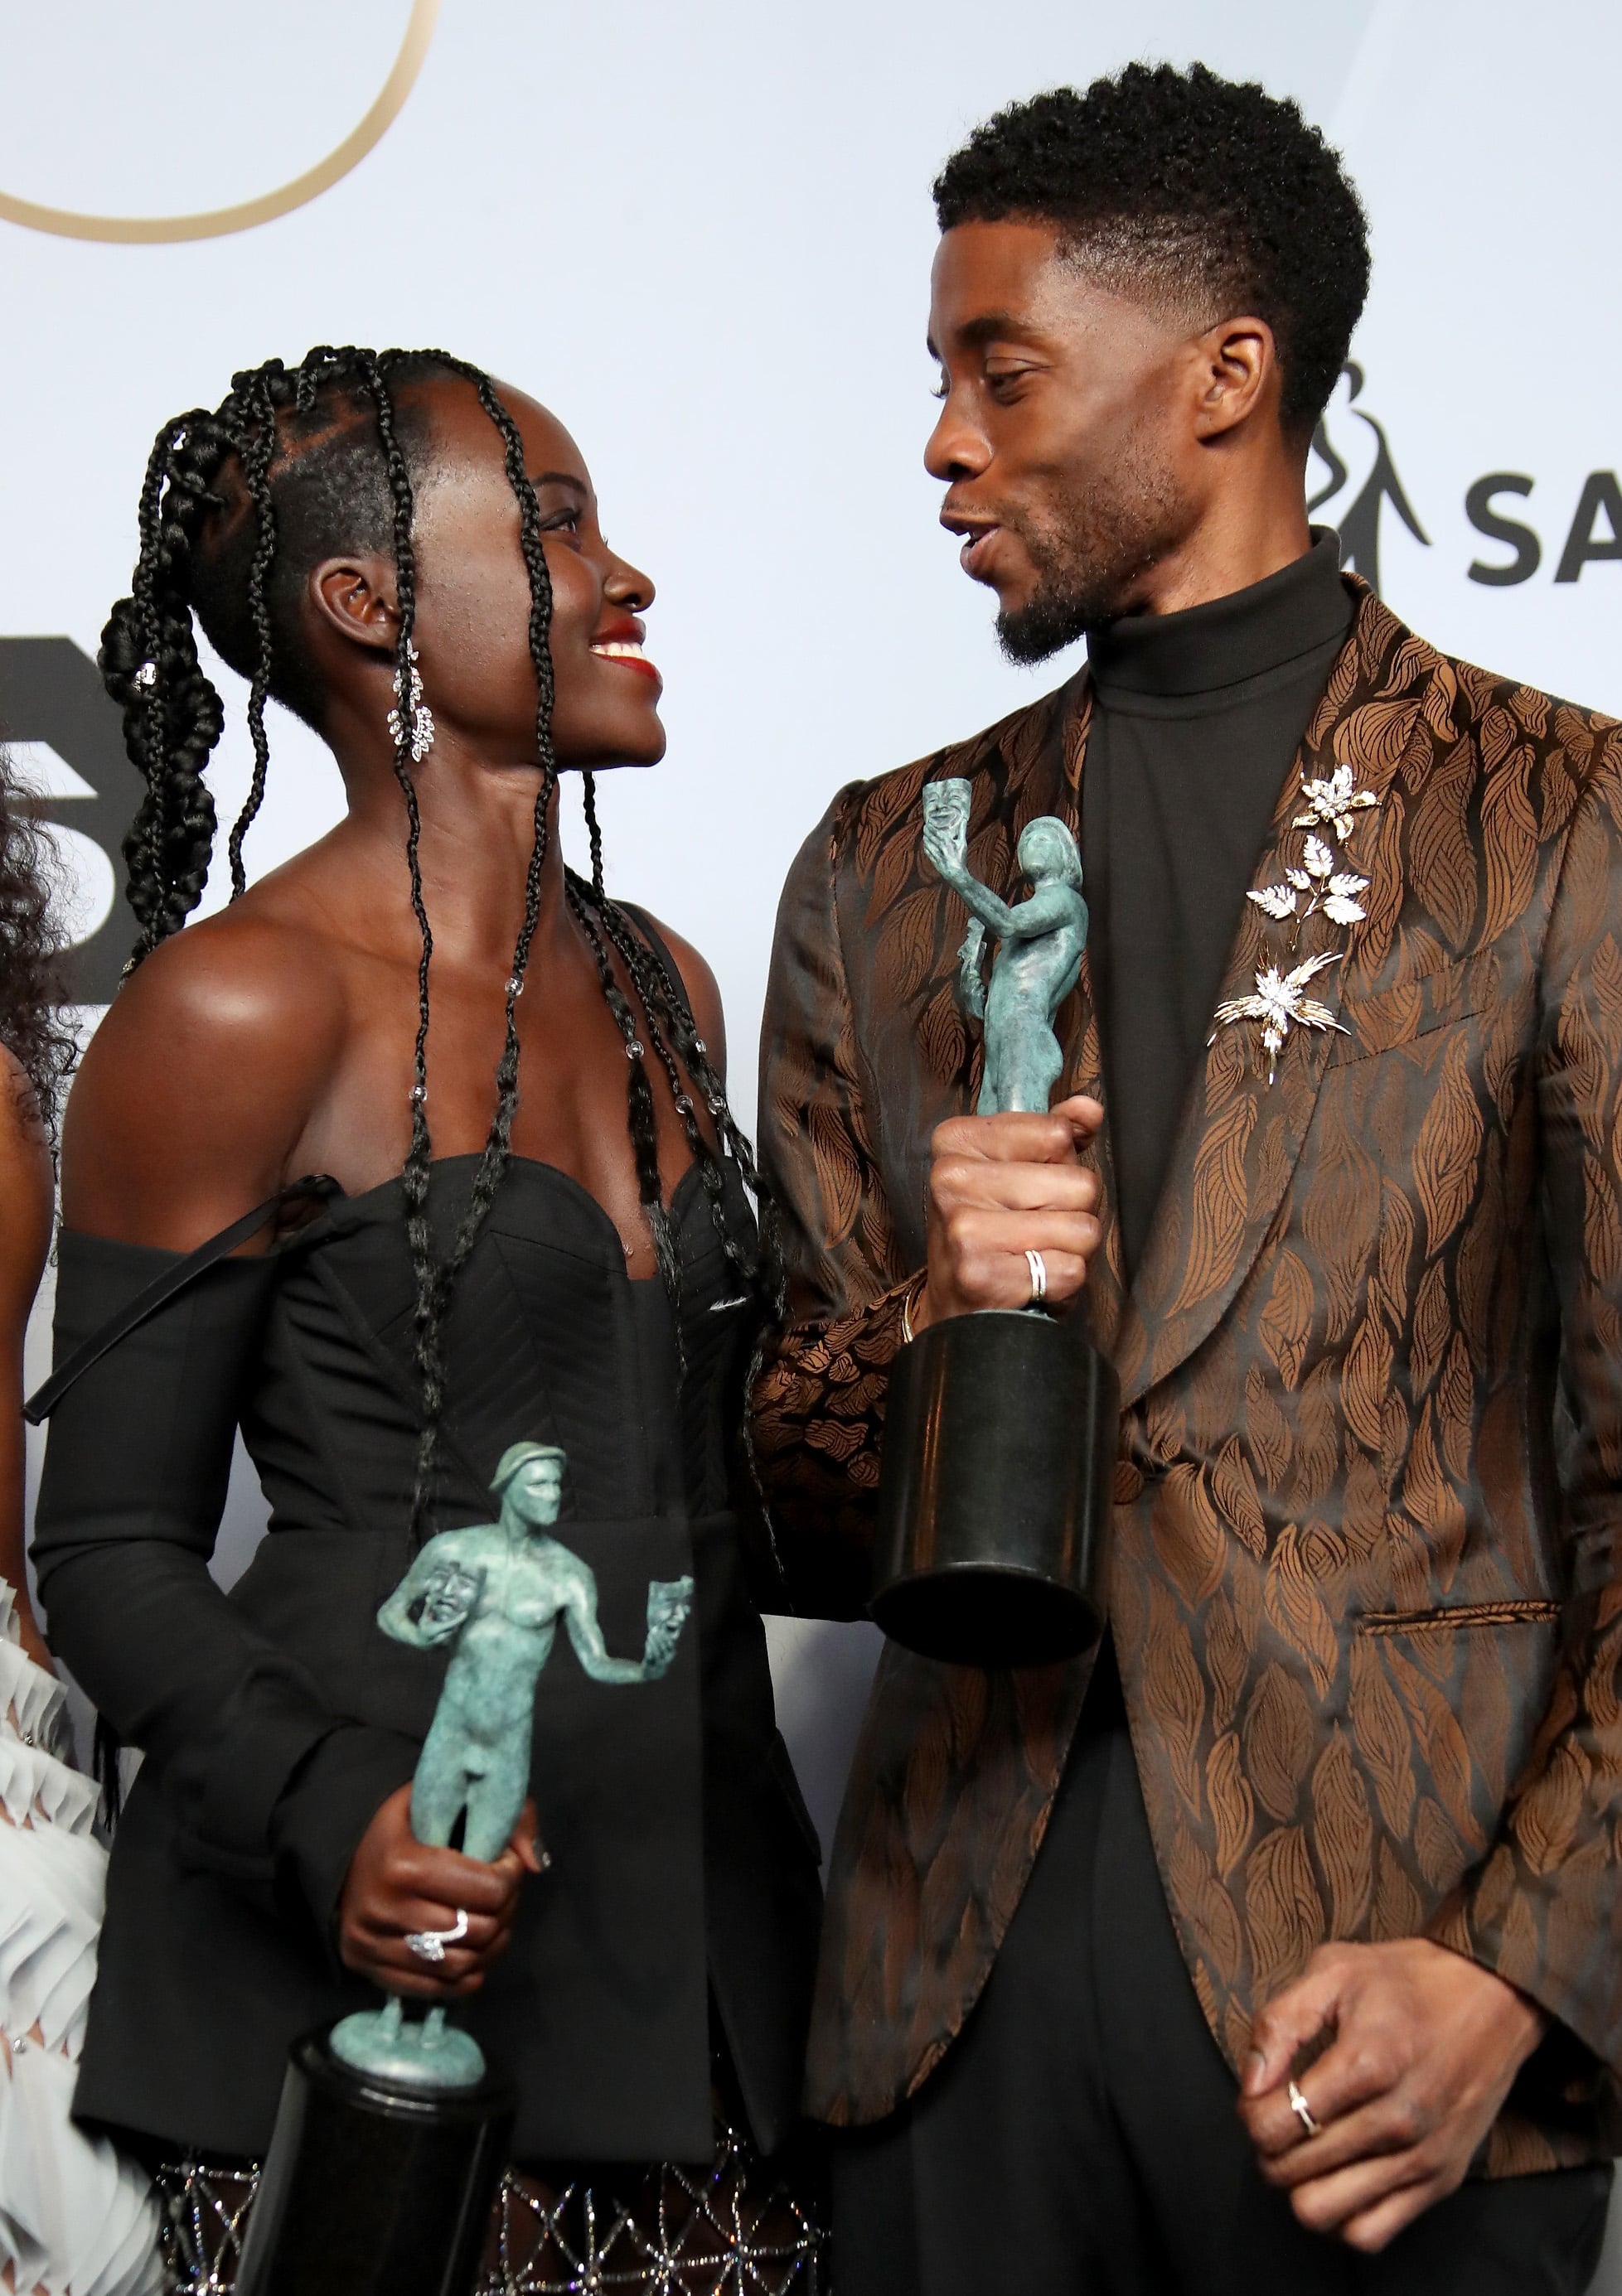 LOS ANGELES, CA - JANUARY 27: Lupita Nyong'o and Chadwick Boseman, winners of Outstanding Performance by a Cast in a Motion Picture for 'Black Panther,' pose in the press room during the 25th Annual Screen Actors Guild Awards at The Shrine Auditorium on January 27, 2019 in Los Angeles, California. (Photo by Dan MacMedan/Getty Images) *** Local Caption *** Lupita Nyong'o; Chadwick Boseman